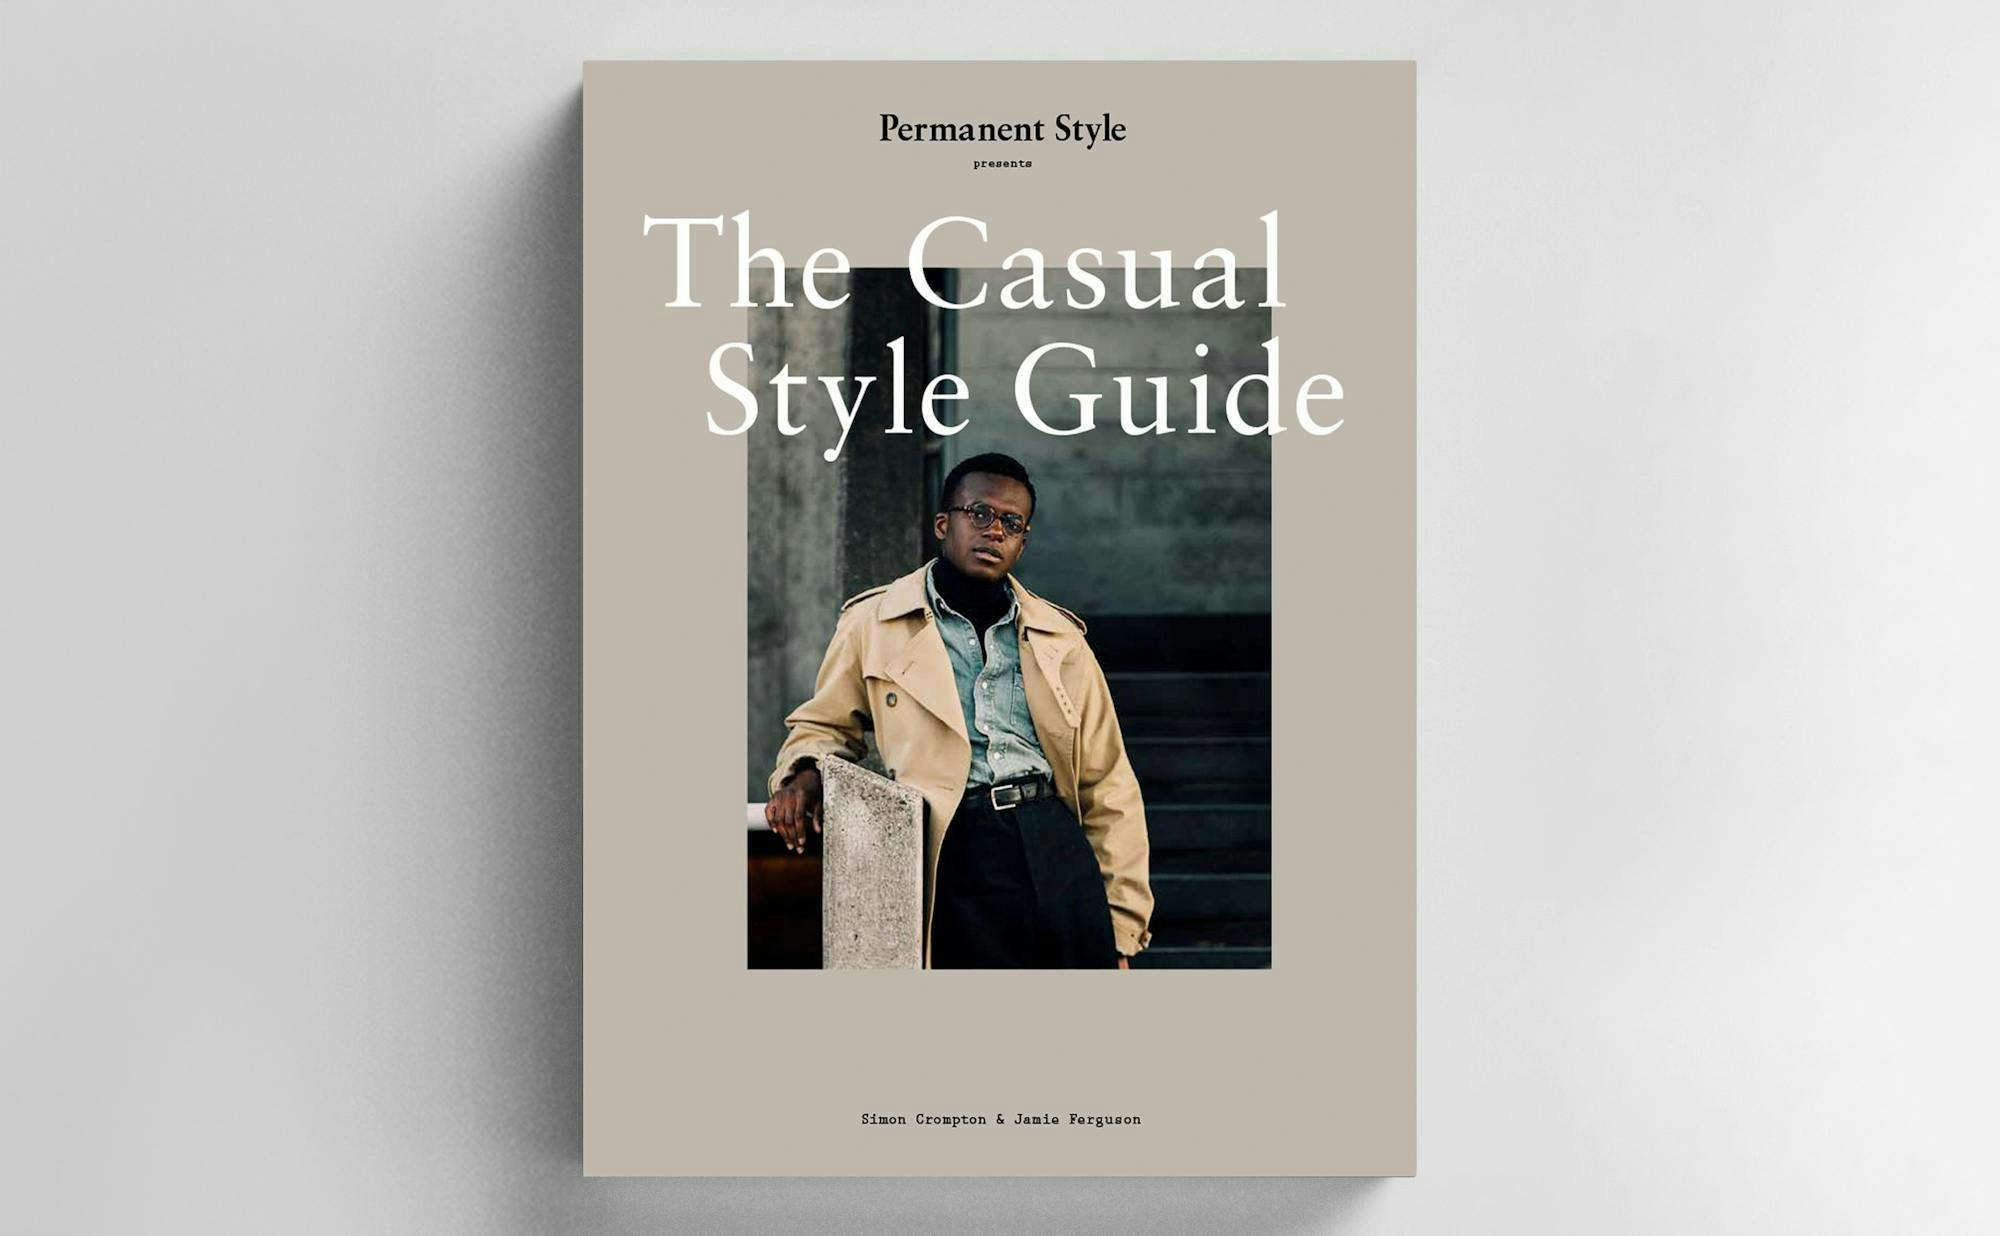 A tan book with a photo of a casually stylish man wearing glasses on the cover.